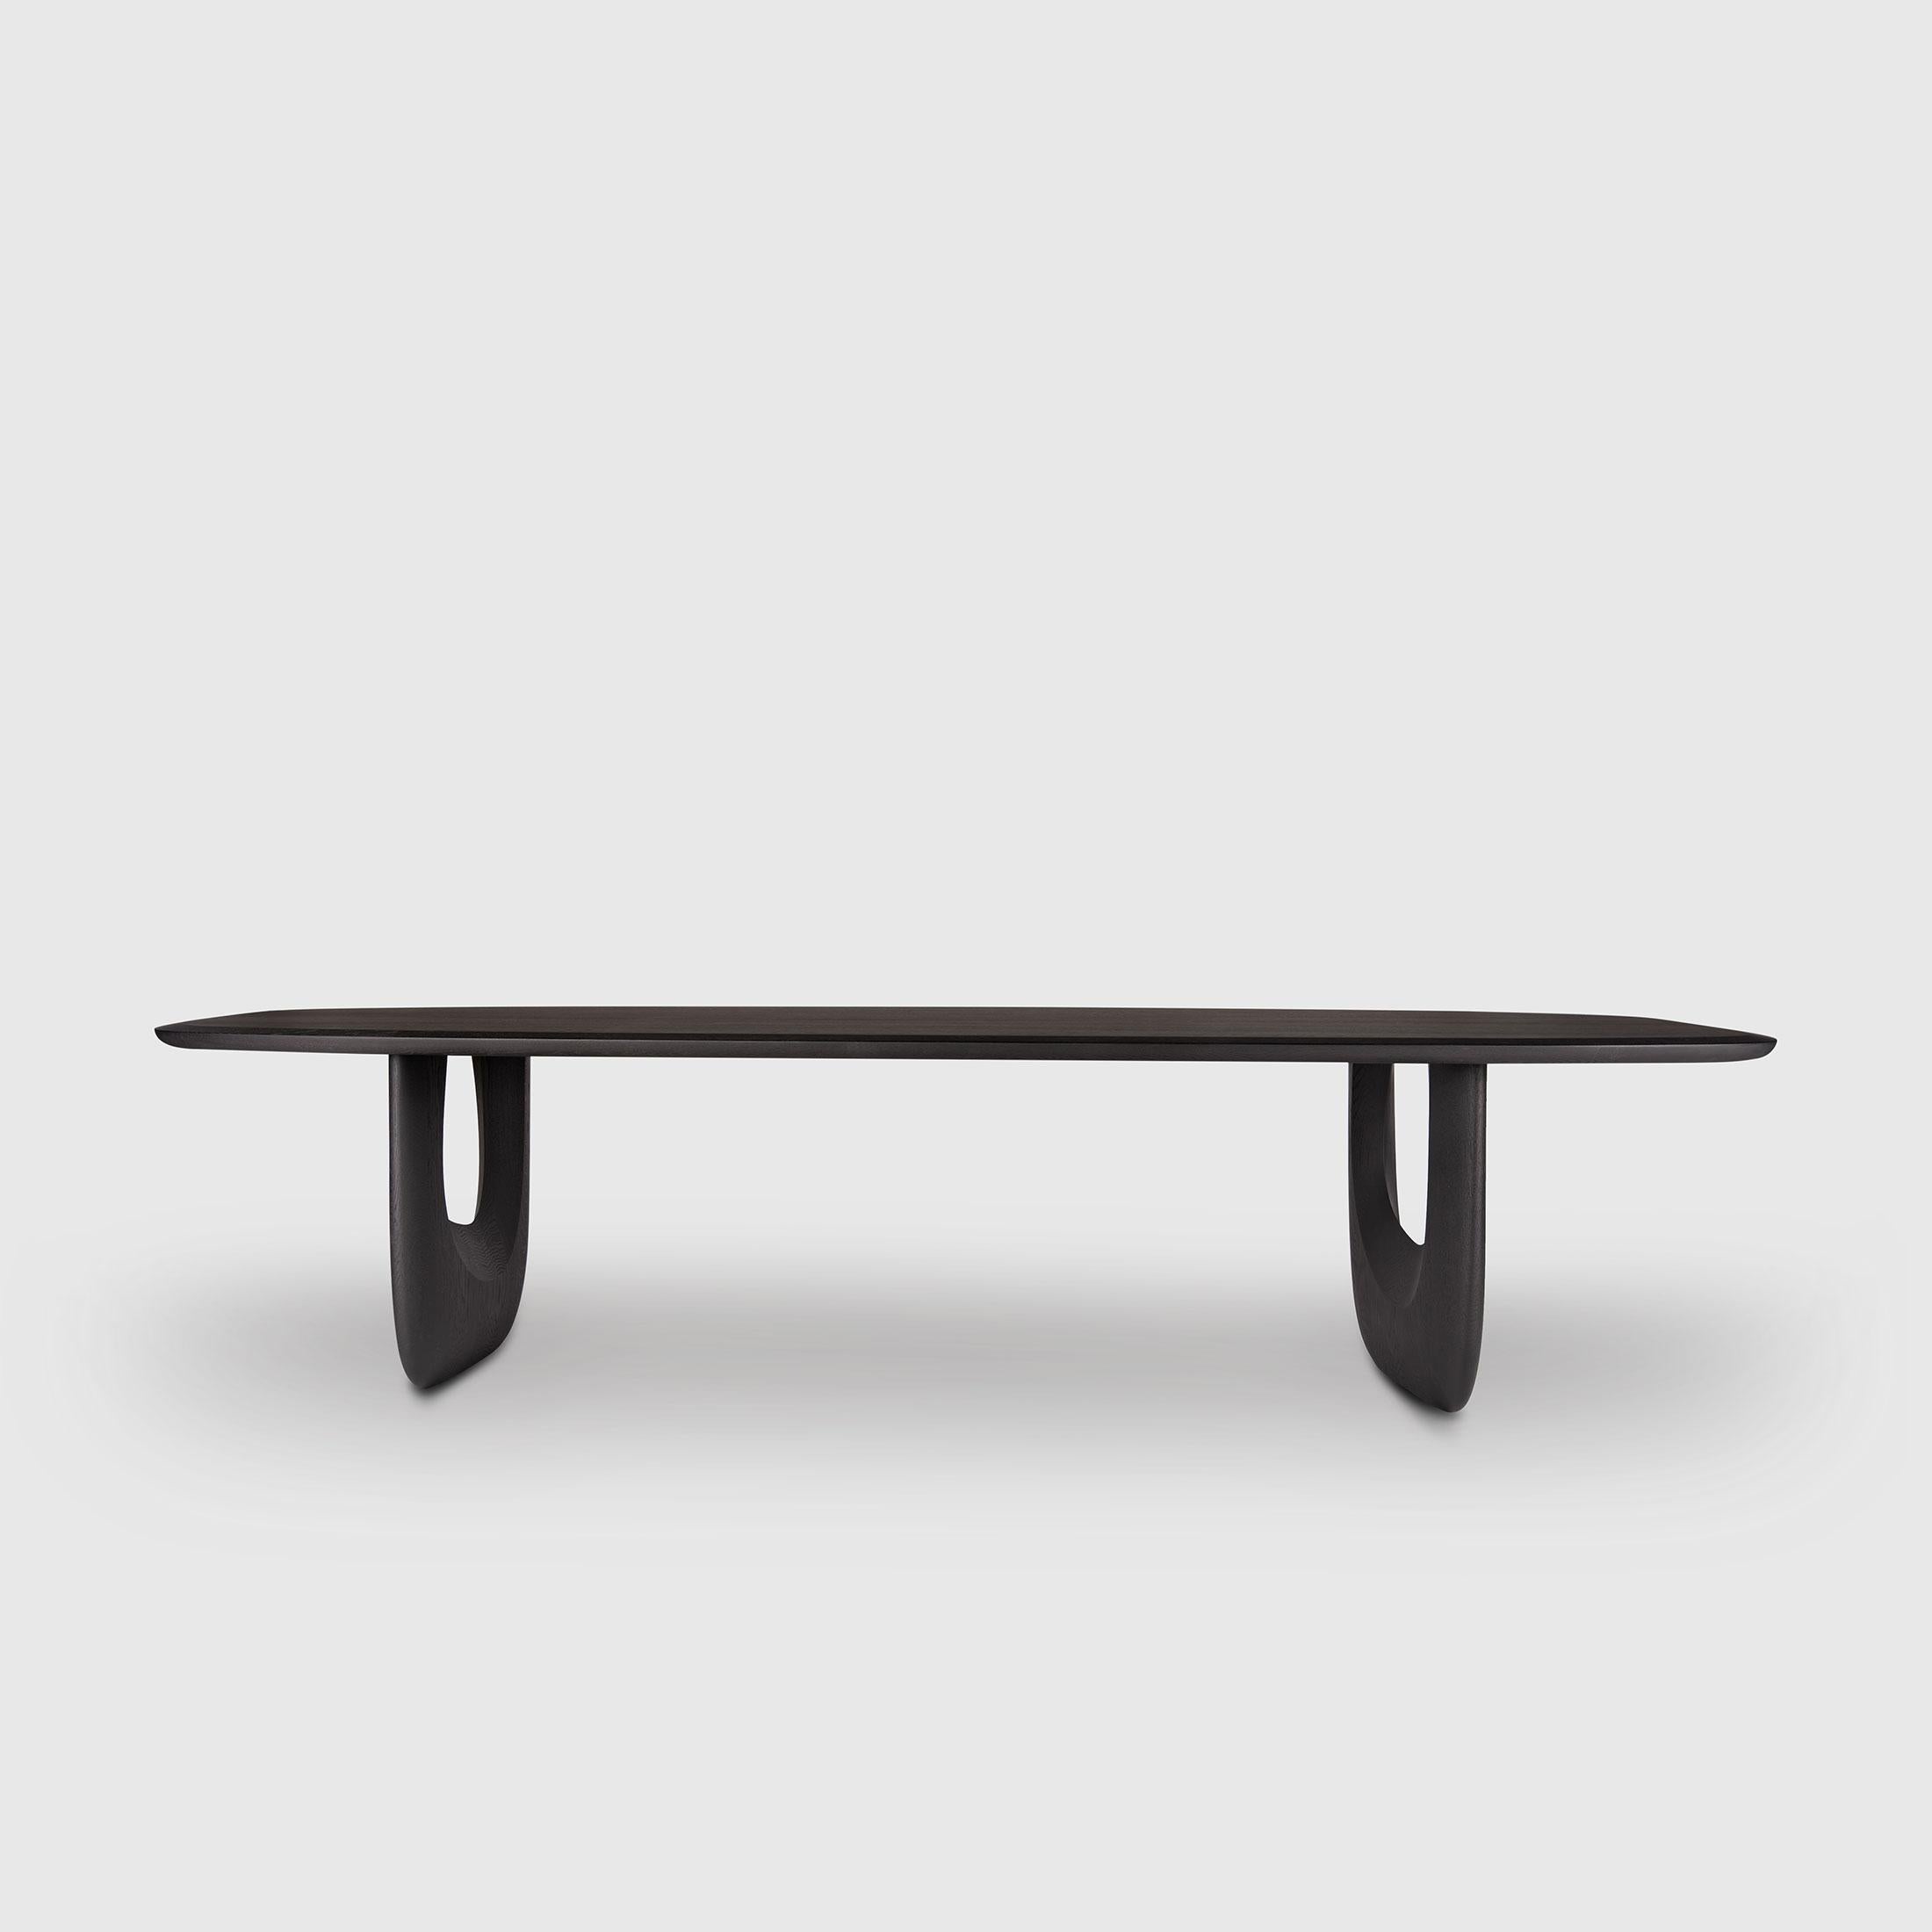 'Savignyplatz' Dining Table by Man of Parts
Signed by Sebastian Herkner 

Solid oak wood 

Finishes available: 
- Black 
- Mist
- Ivory
- Nude 
- Whiskey

Dimensions available:
Widths from 220 to 500cm by 20cm increments

Model shown: Black oak, H.